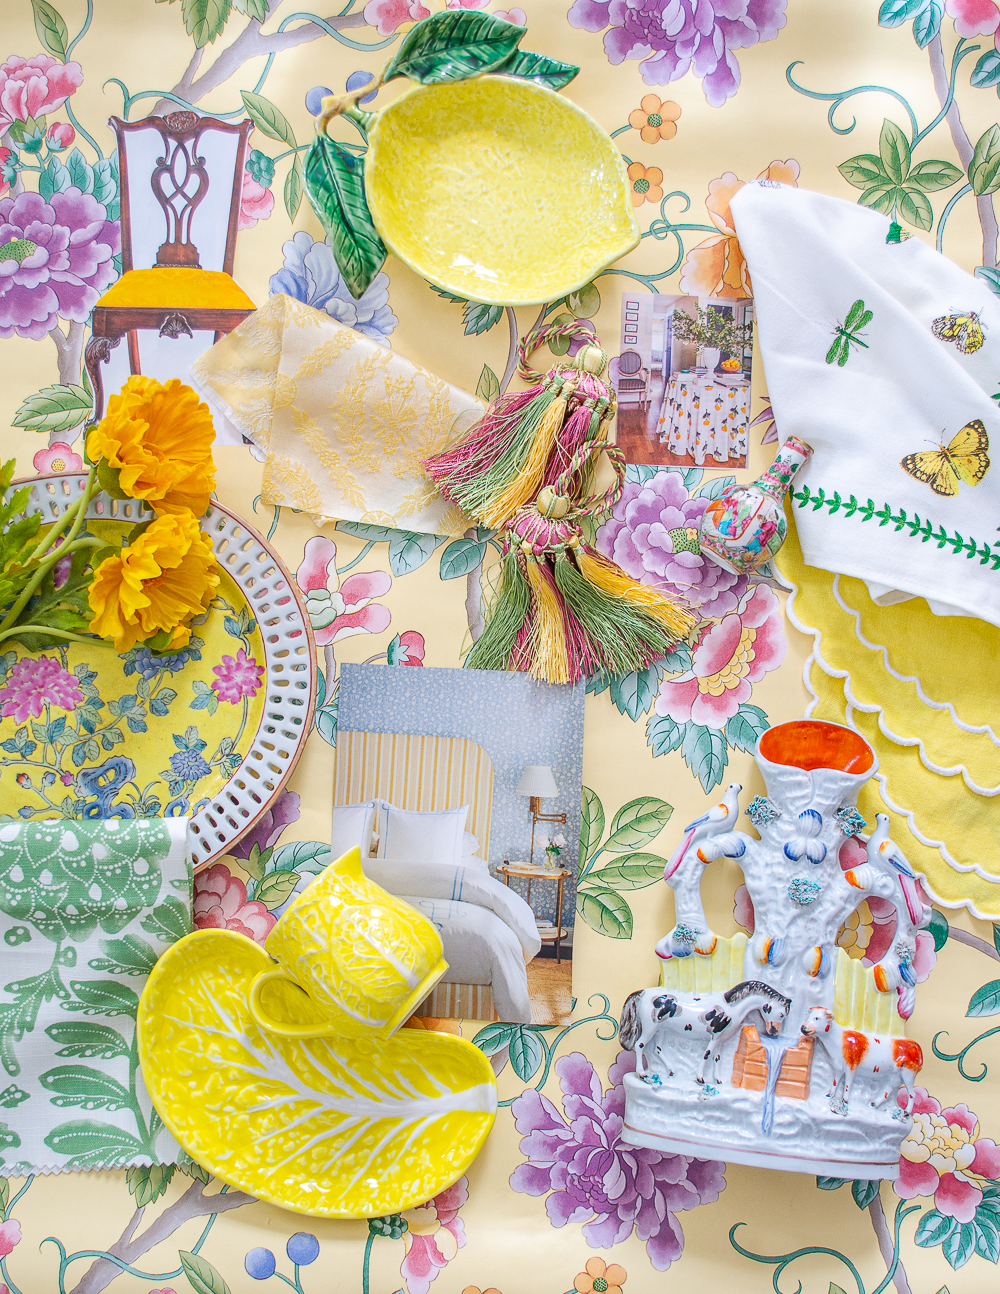 Decorating with yellow flat lay with yellow ceramics, fabric, wallpaper, and decorative accents